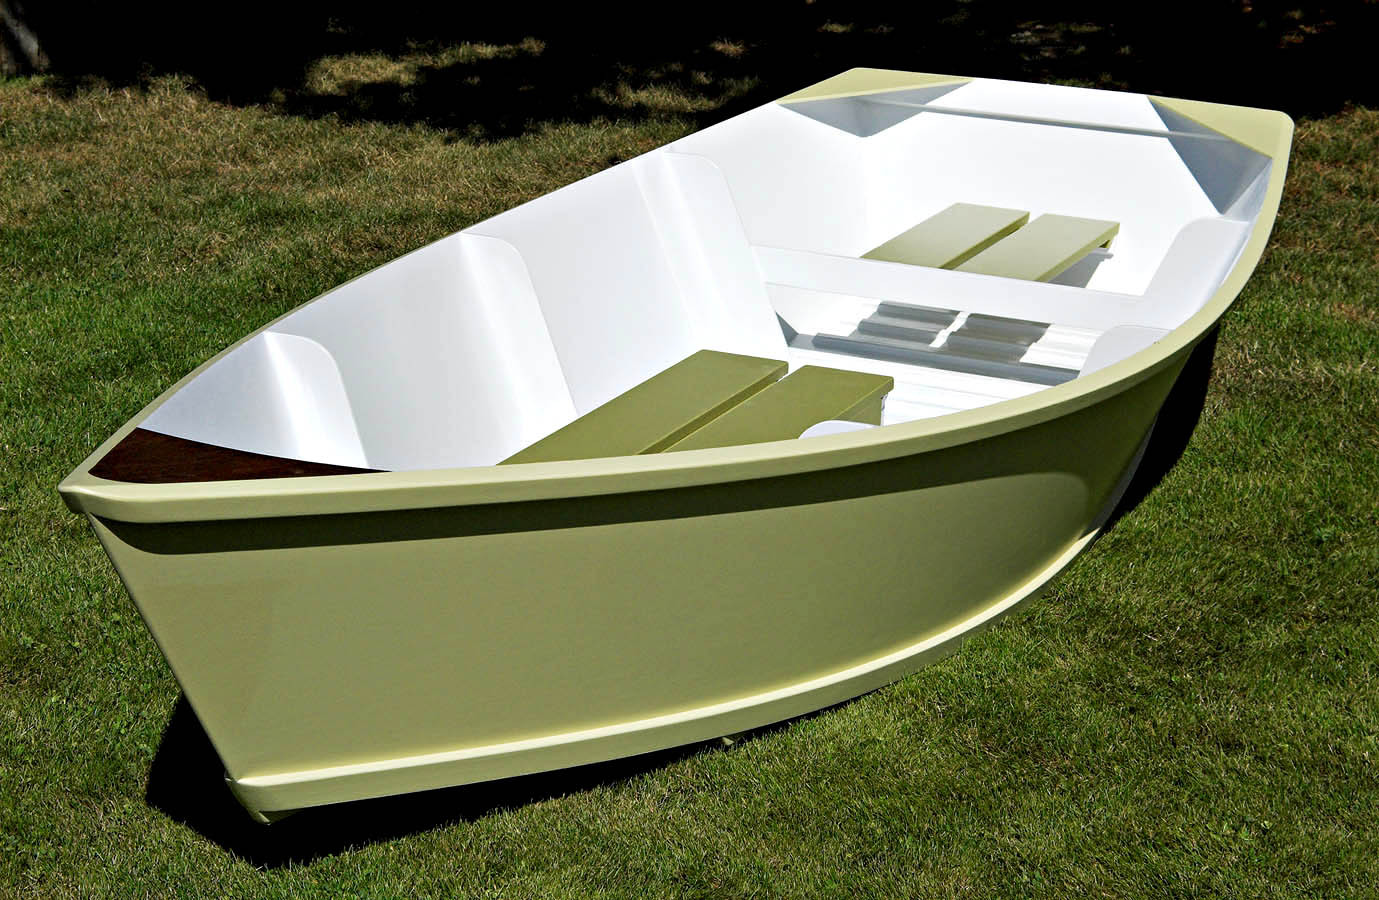 DIY Boat Plans
 Dory Boat Plans Free Download How To Diy Download Pdf